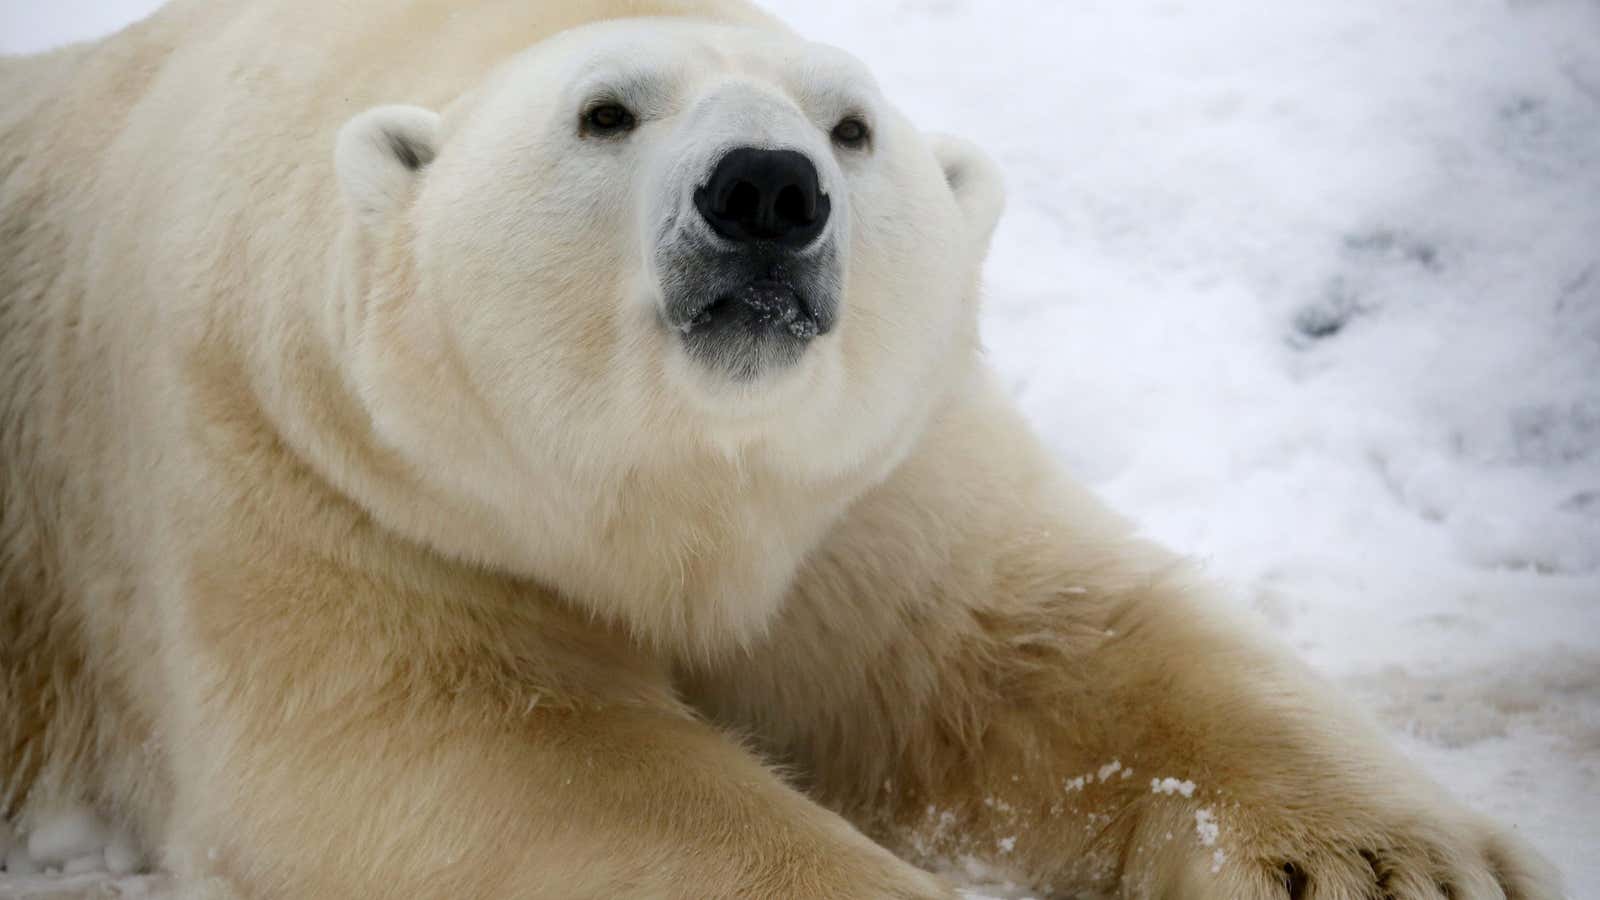 We shouldn’t need to see polar bears as sweet and cuddly in order to care about their welfare.